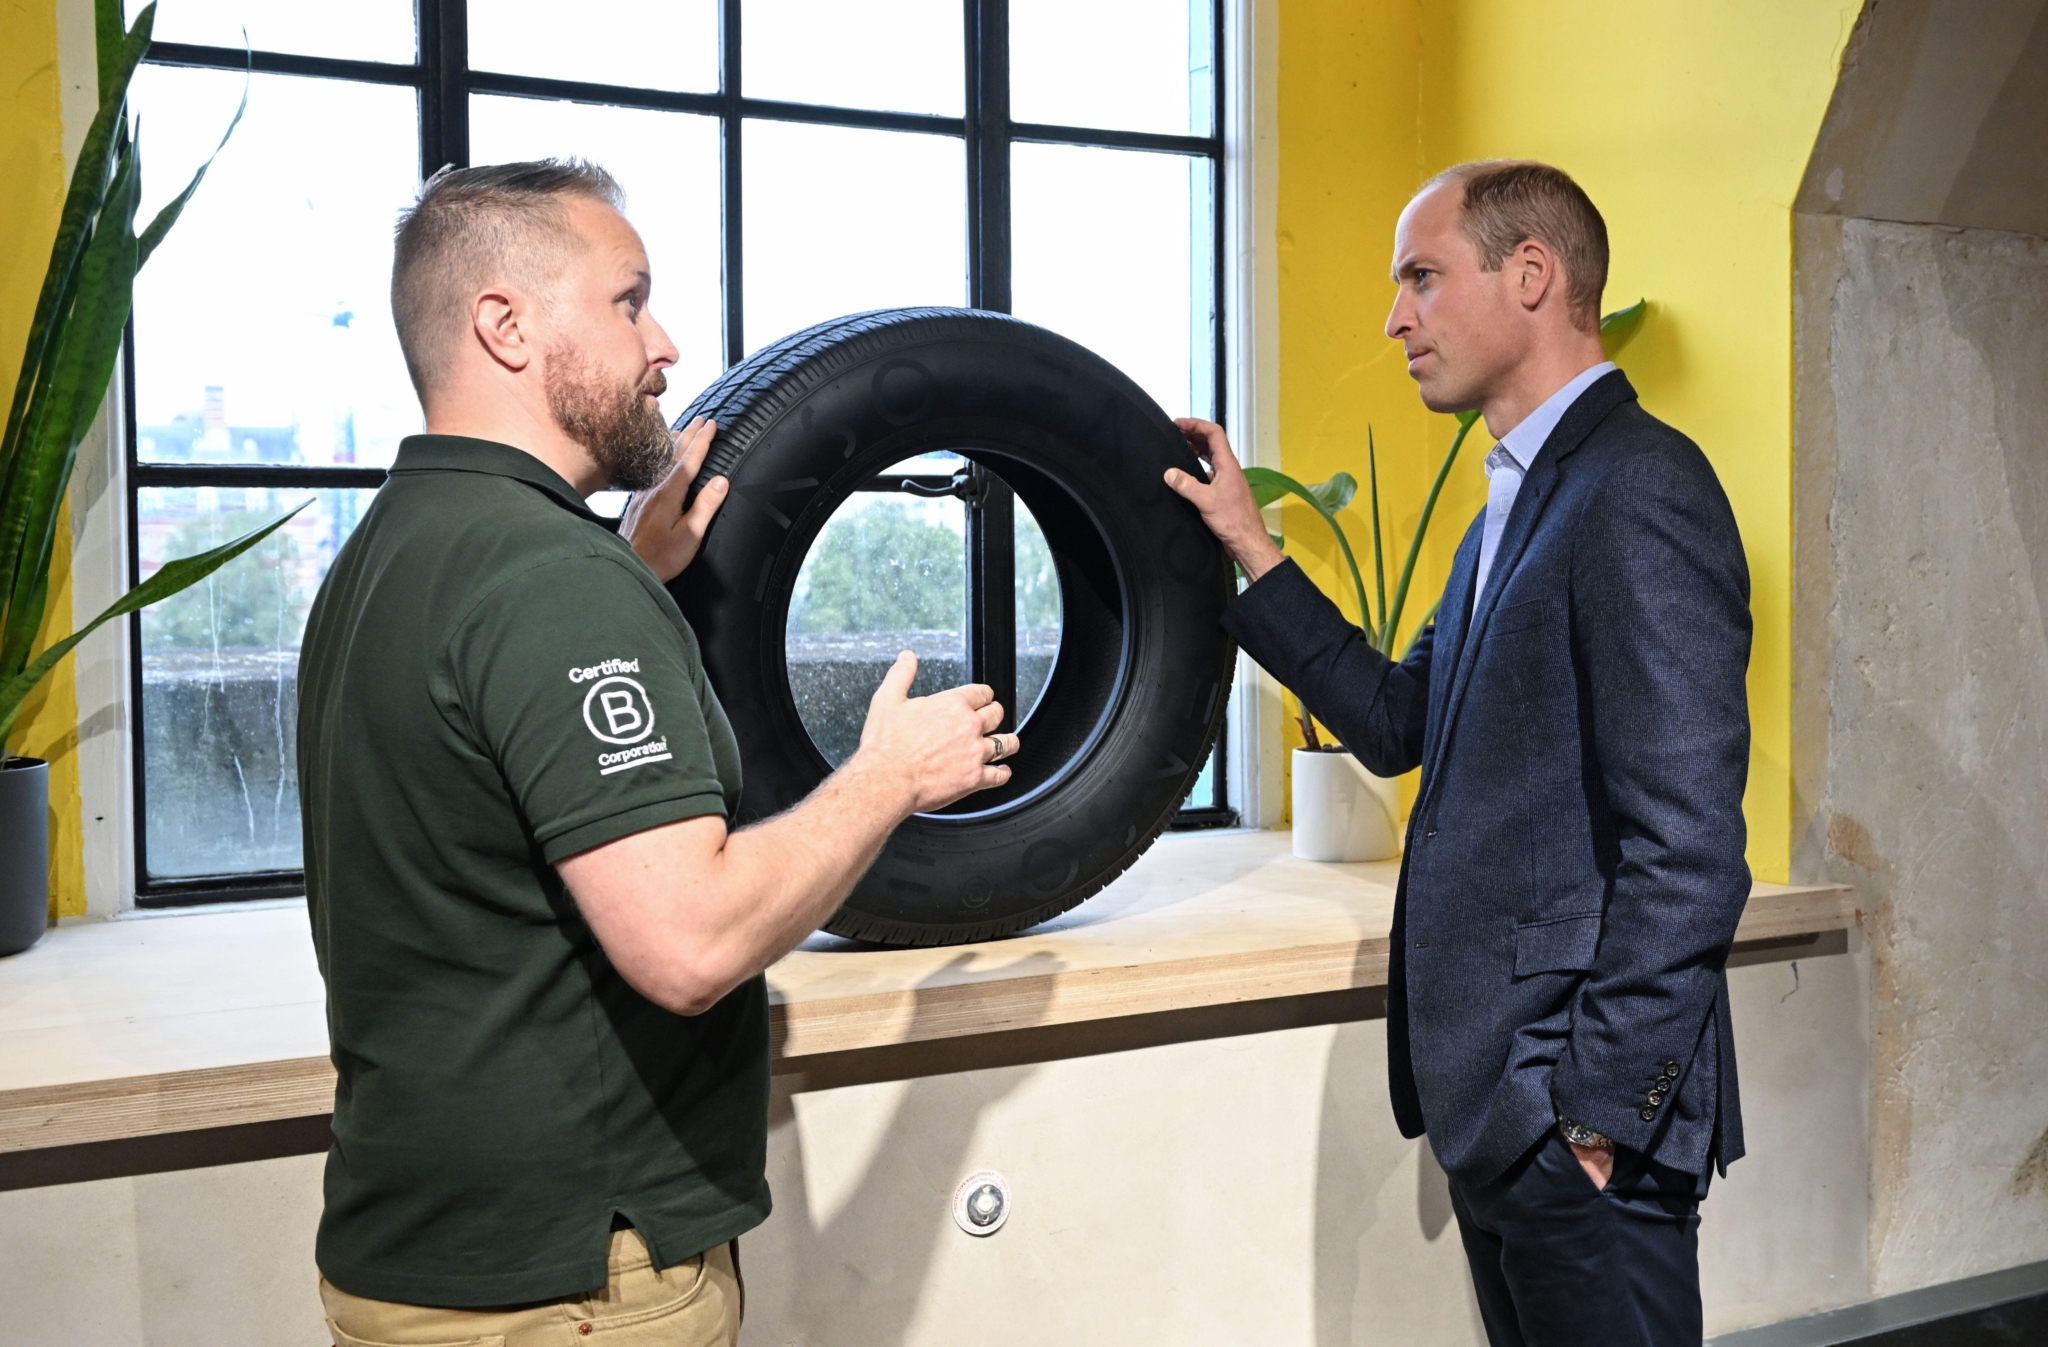 Enso commits to fully decarbonized tyres by 2030, challenges tyre industry to phase-out fossil fuels